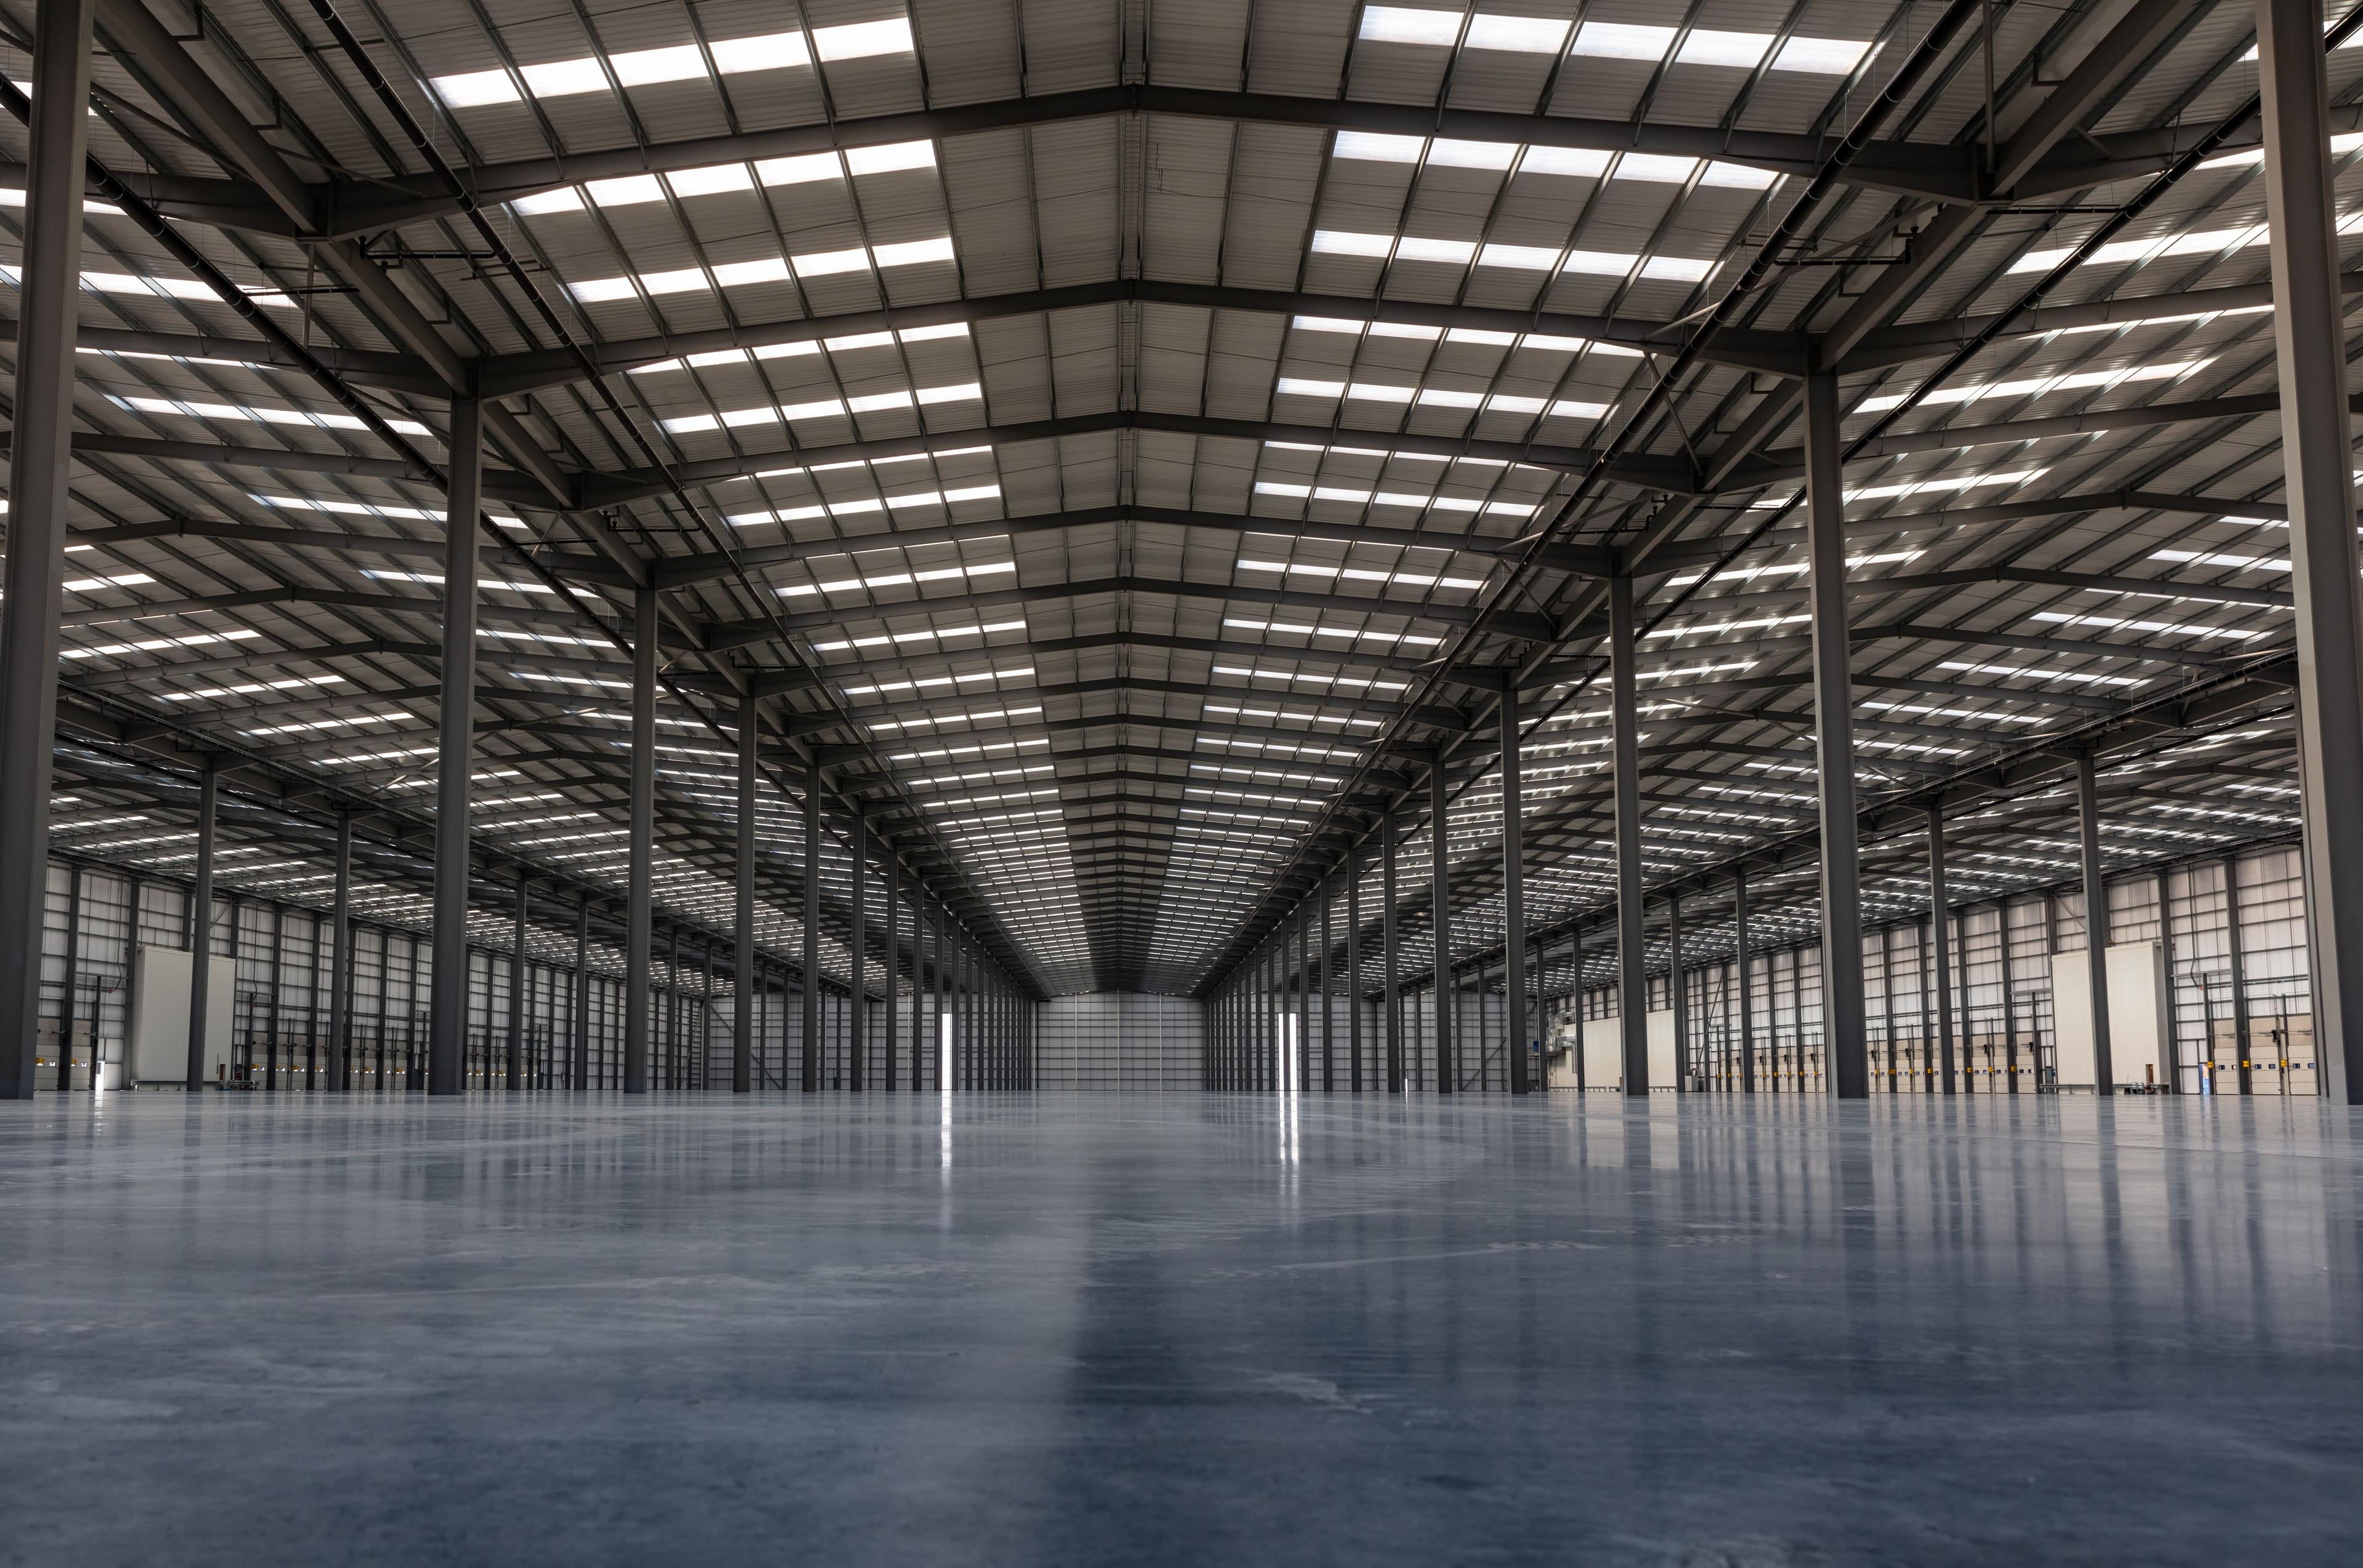 The interior of a warehouse